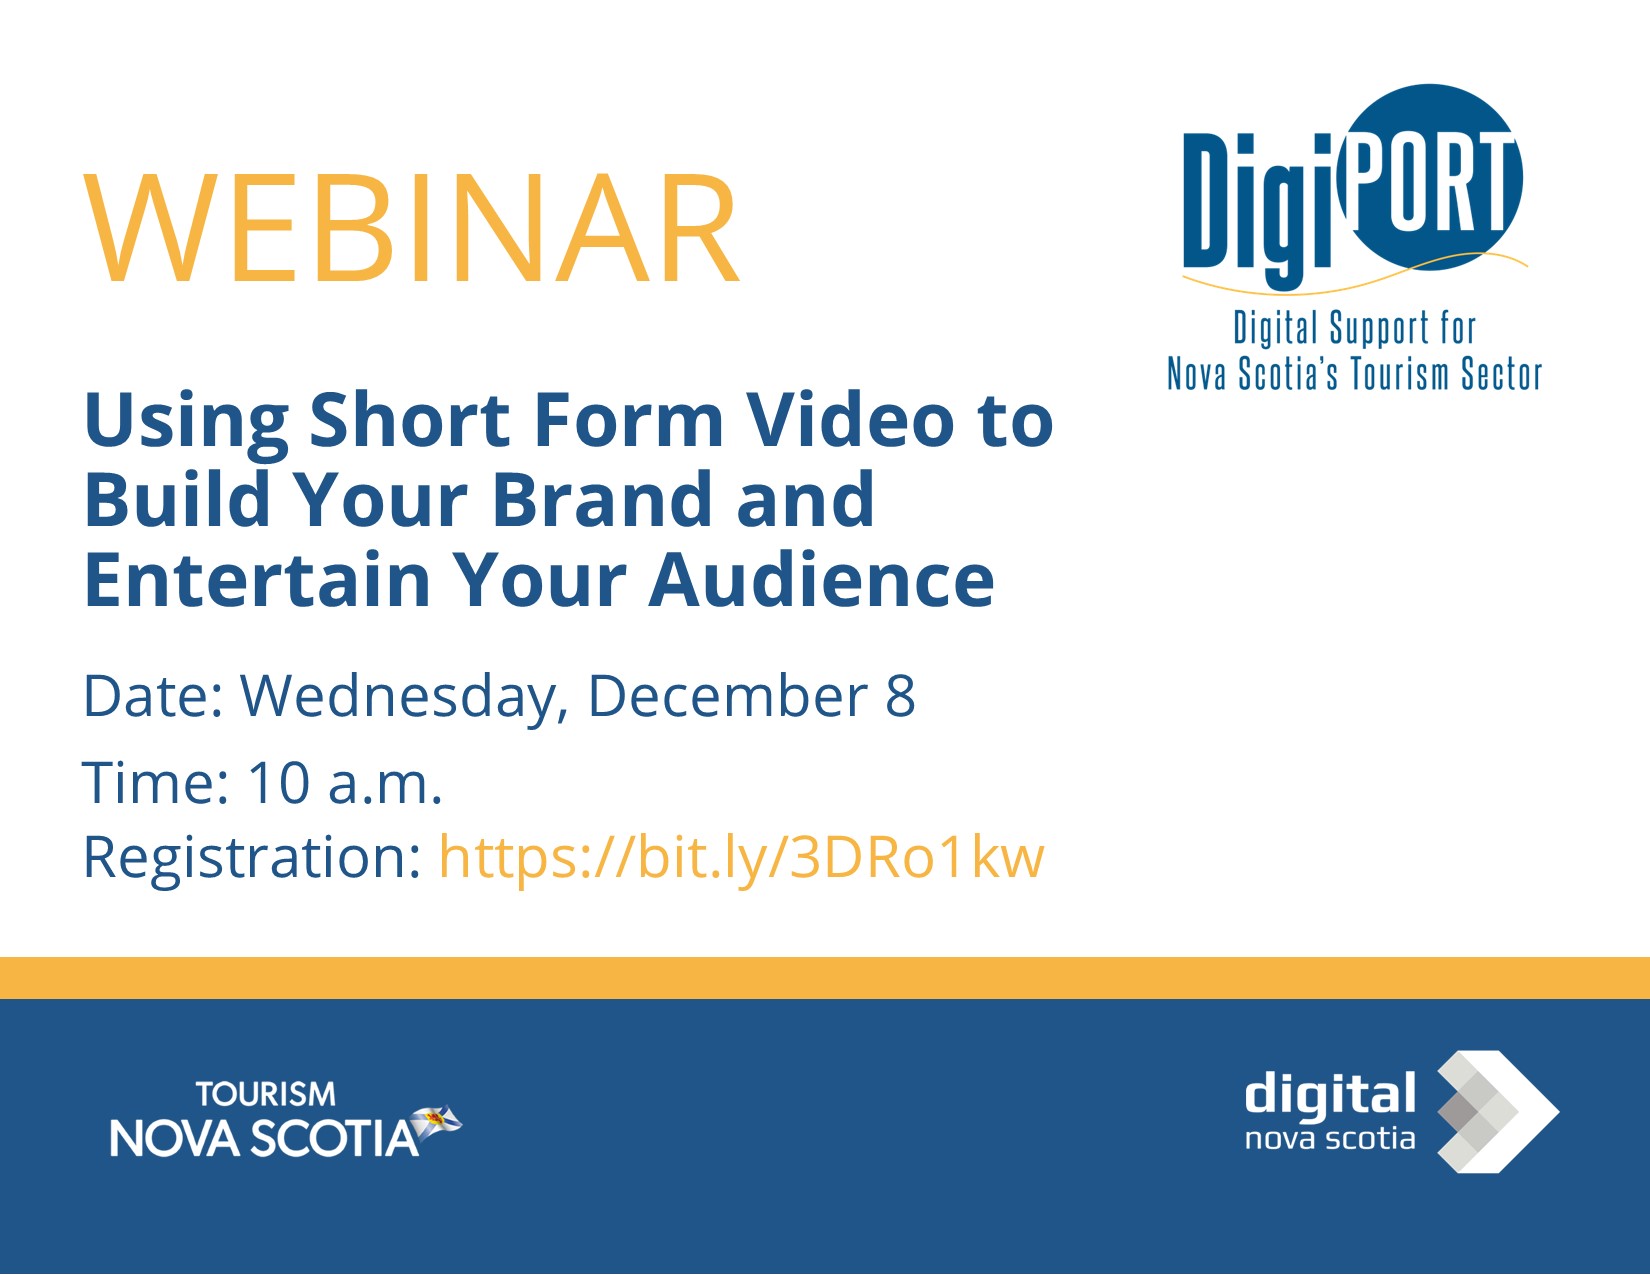 Webinar: Use Short Form Video to Build Your Brand and Entertain Your Audience. Date: Wednesday, December 8. Time: 10a.m.